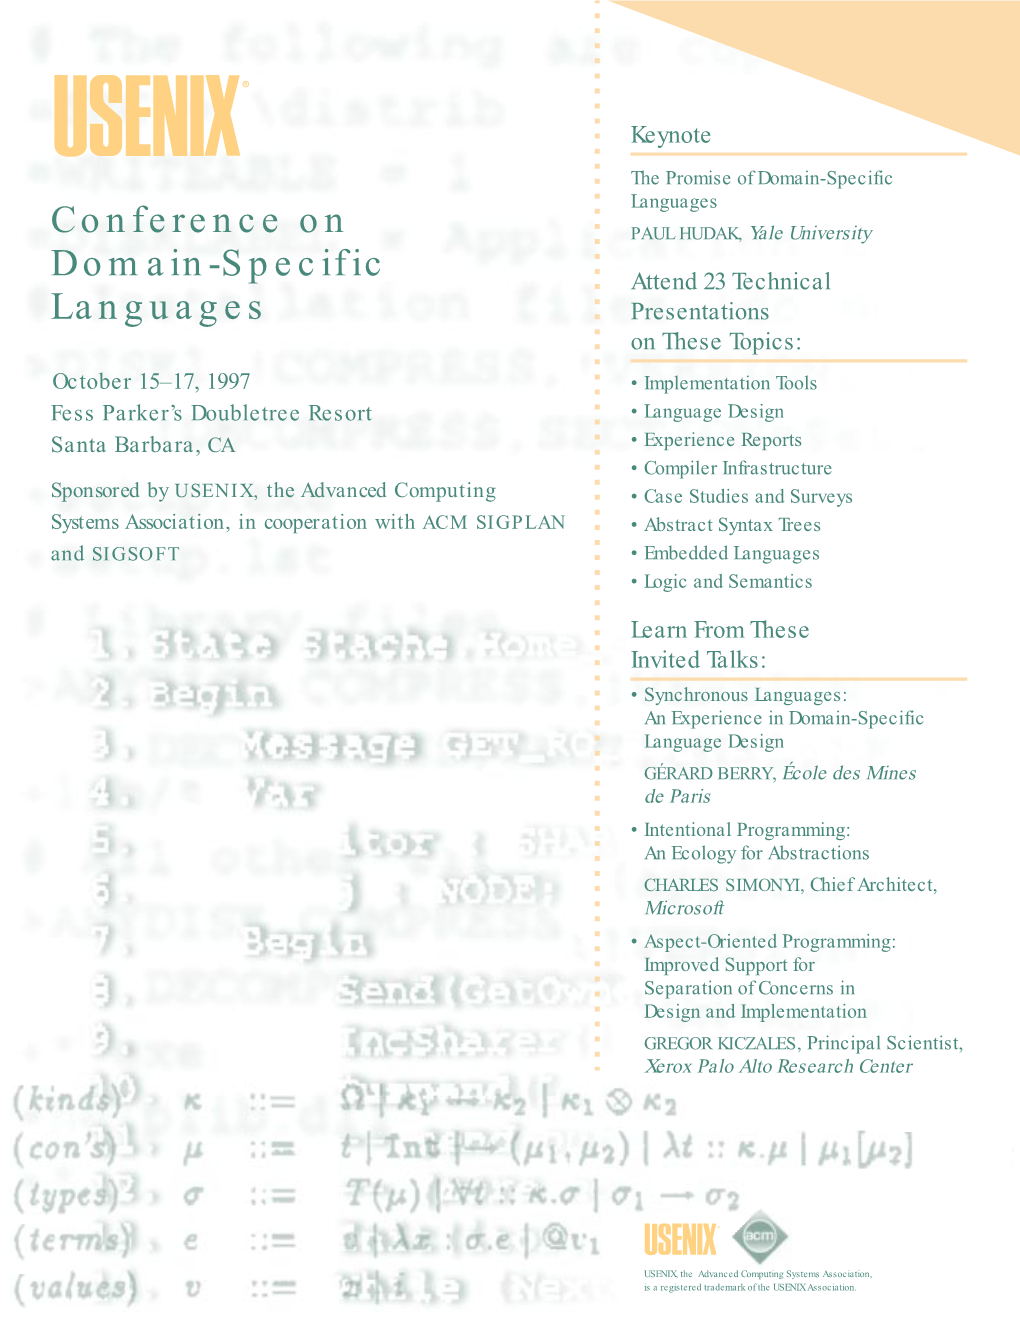 Conference on Domain-Specific Languages, October 15–17, 1997